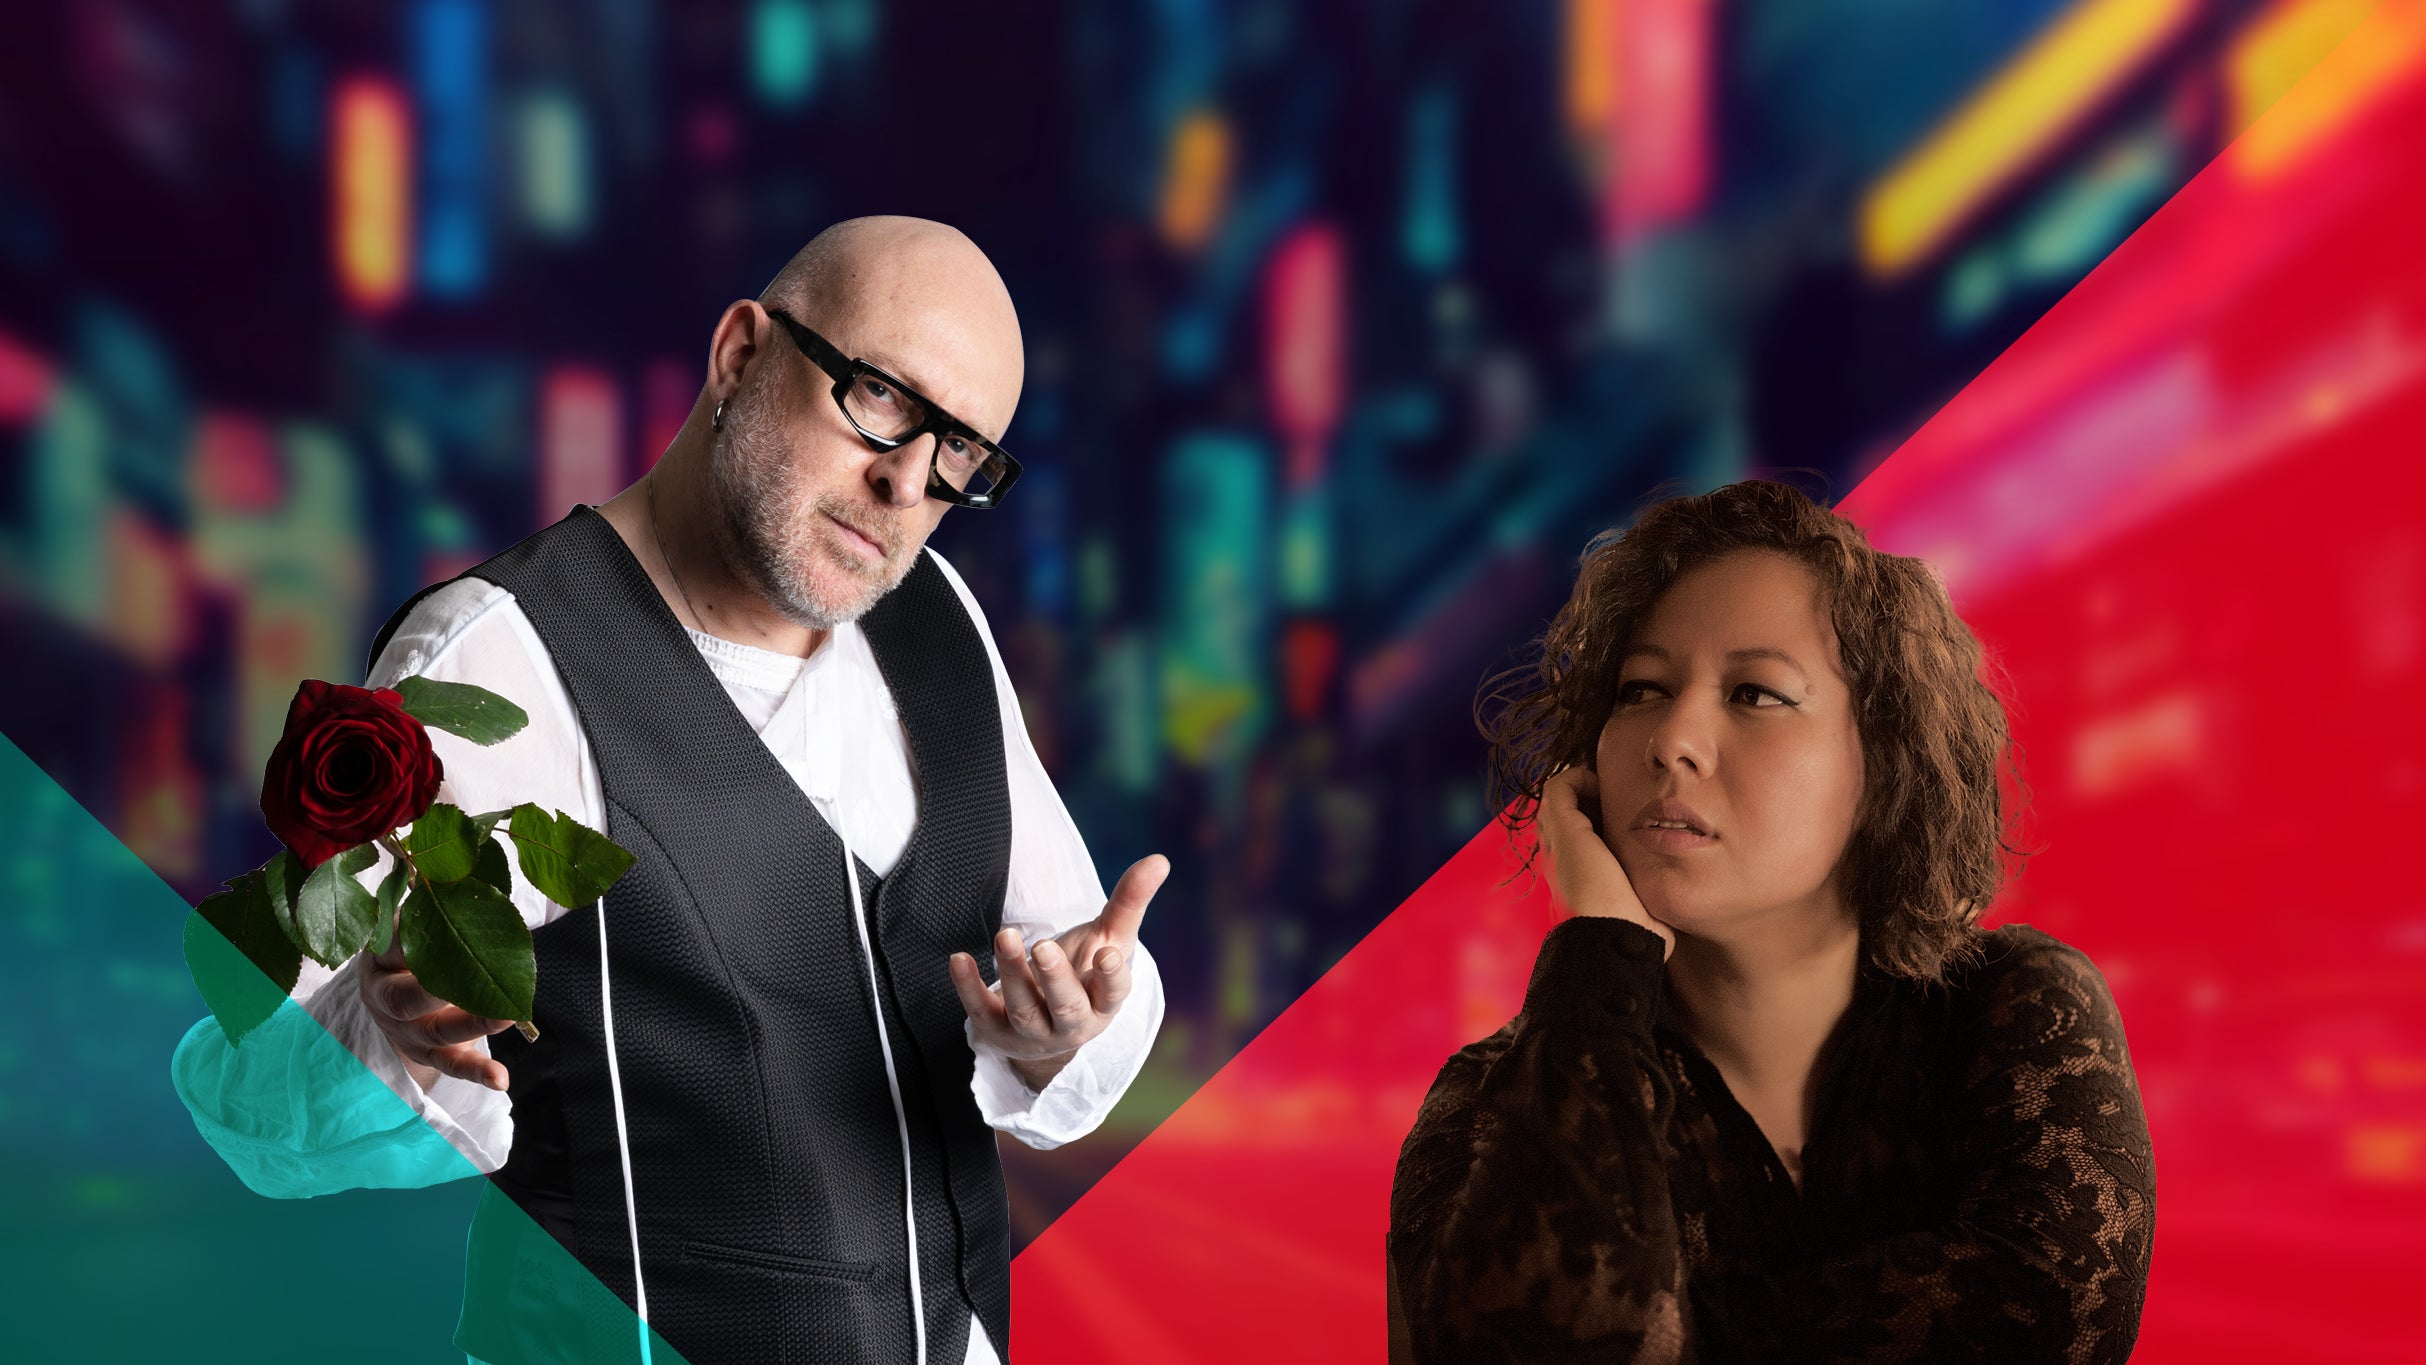 Image used with permission from Ticketmaster | Mario Biondi in Concert with special guest Mahalia Barnes tickets